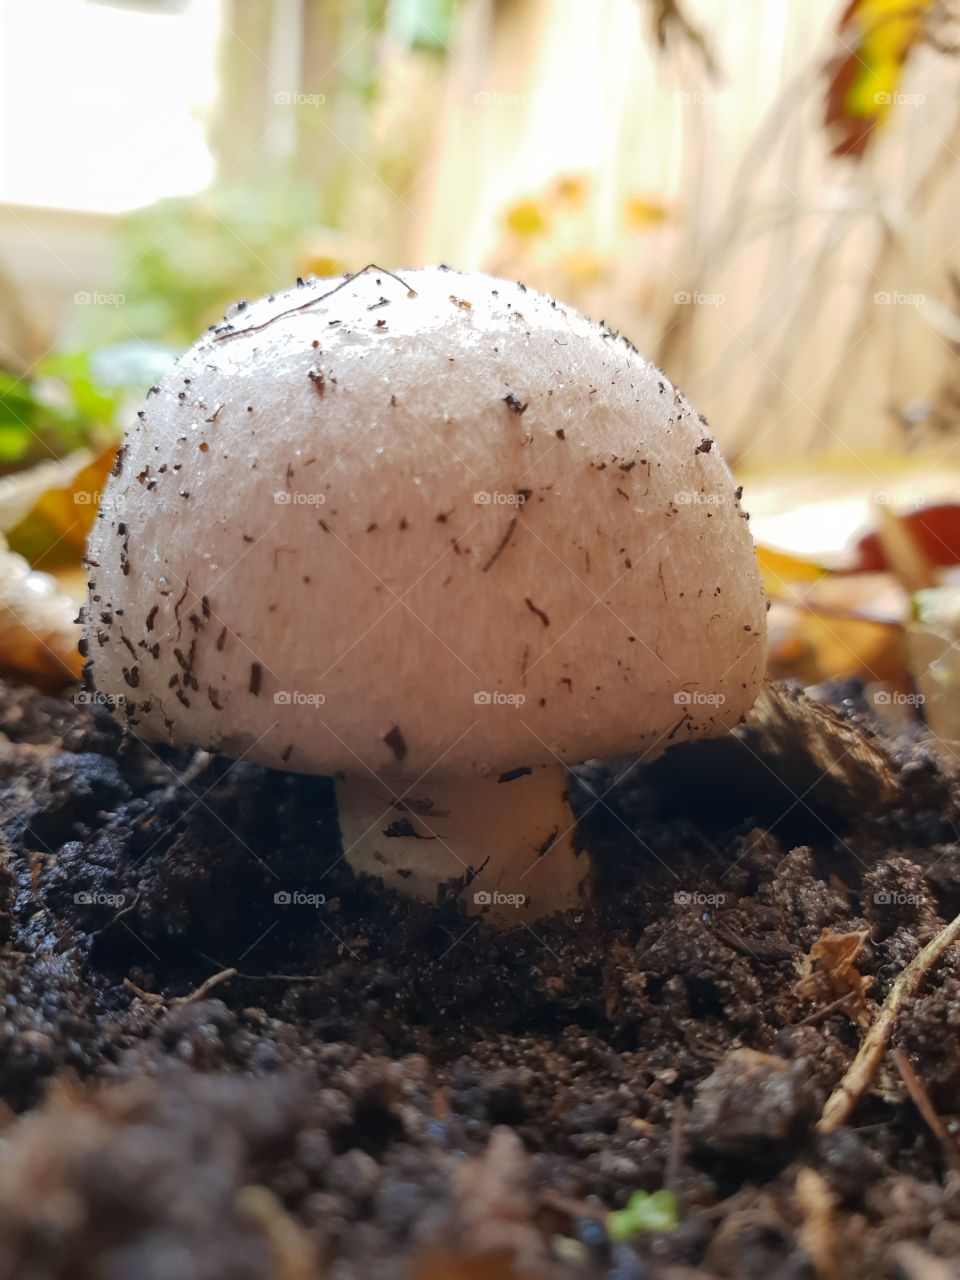 Our only ever mushroom in the garden!